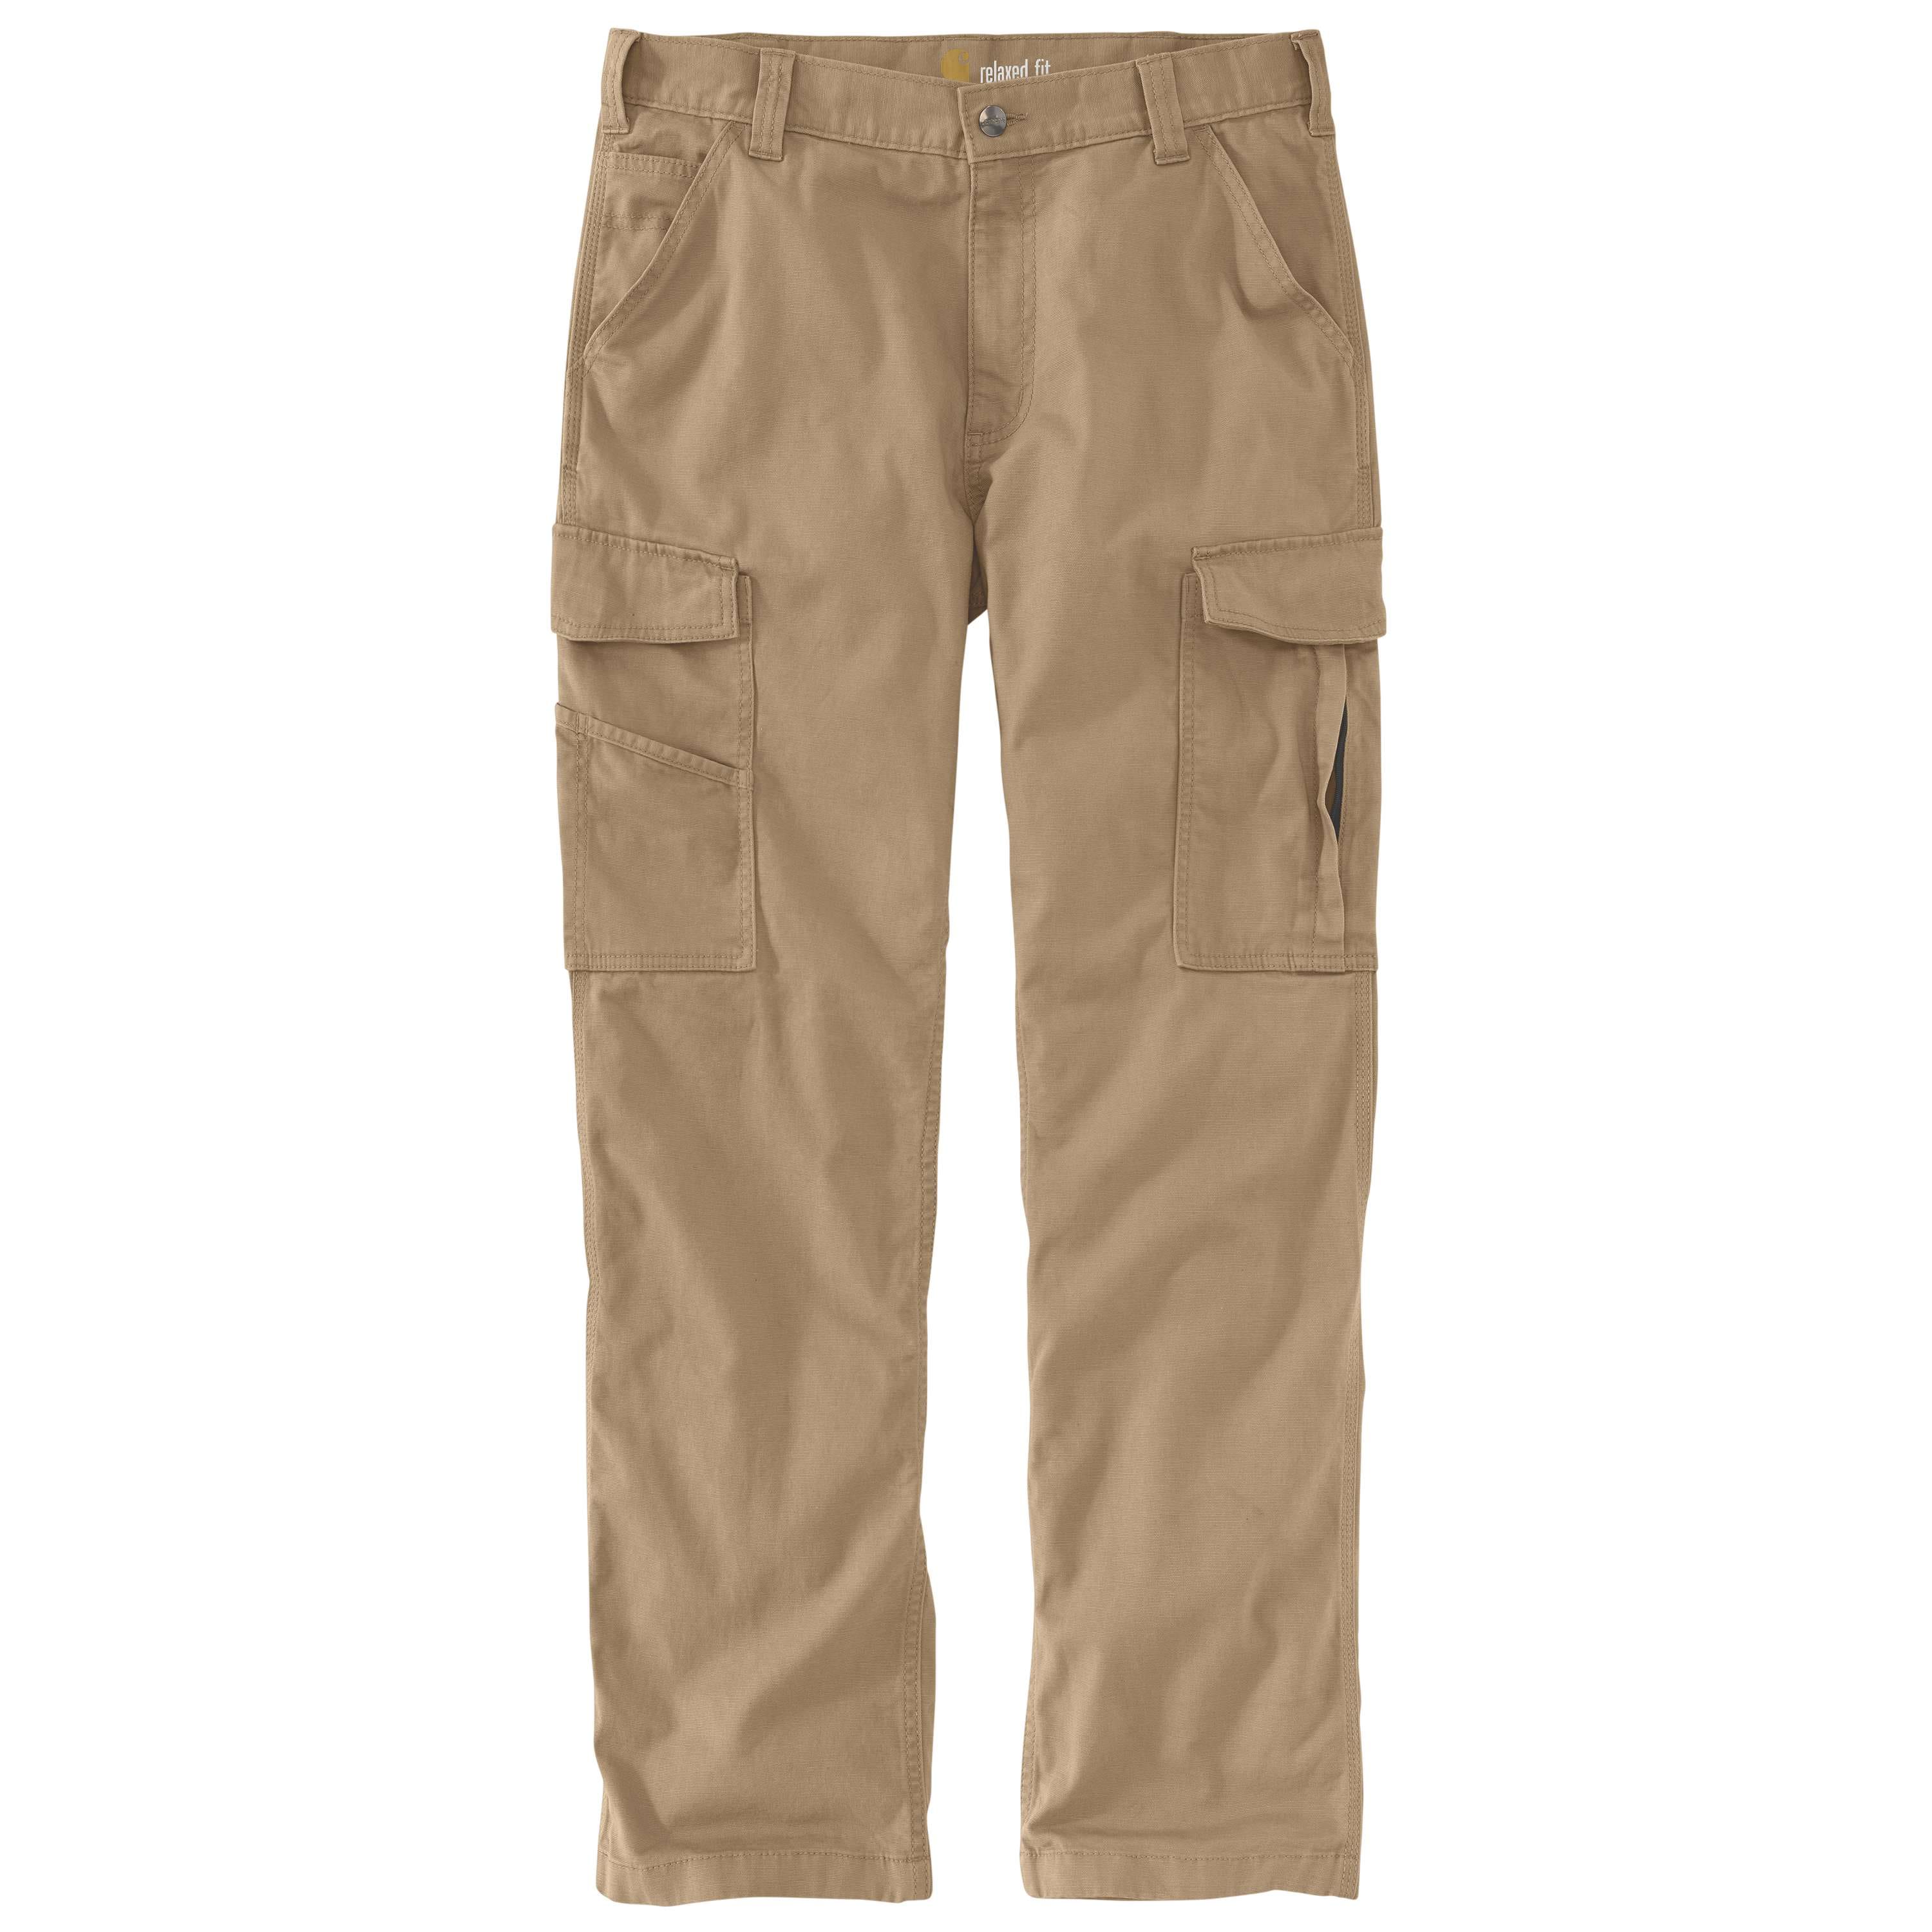 Men's Rugged Flex Relaxed Fit Canvas Cargo Work Pant